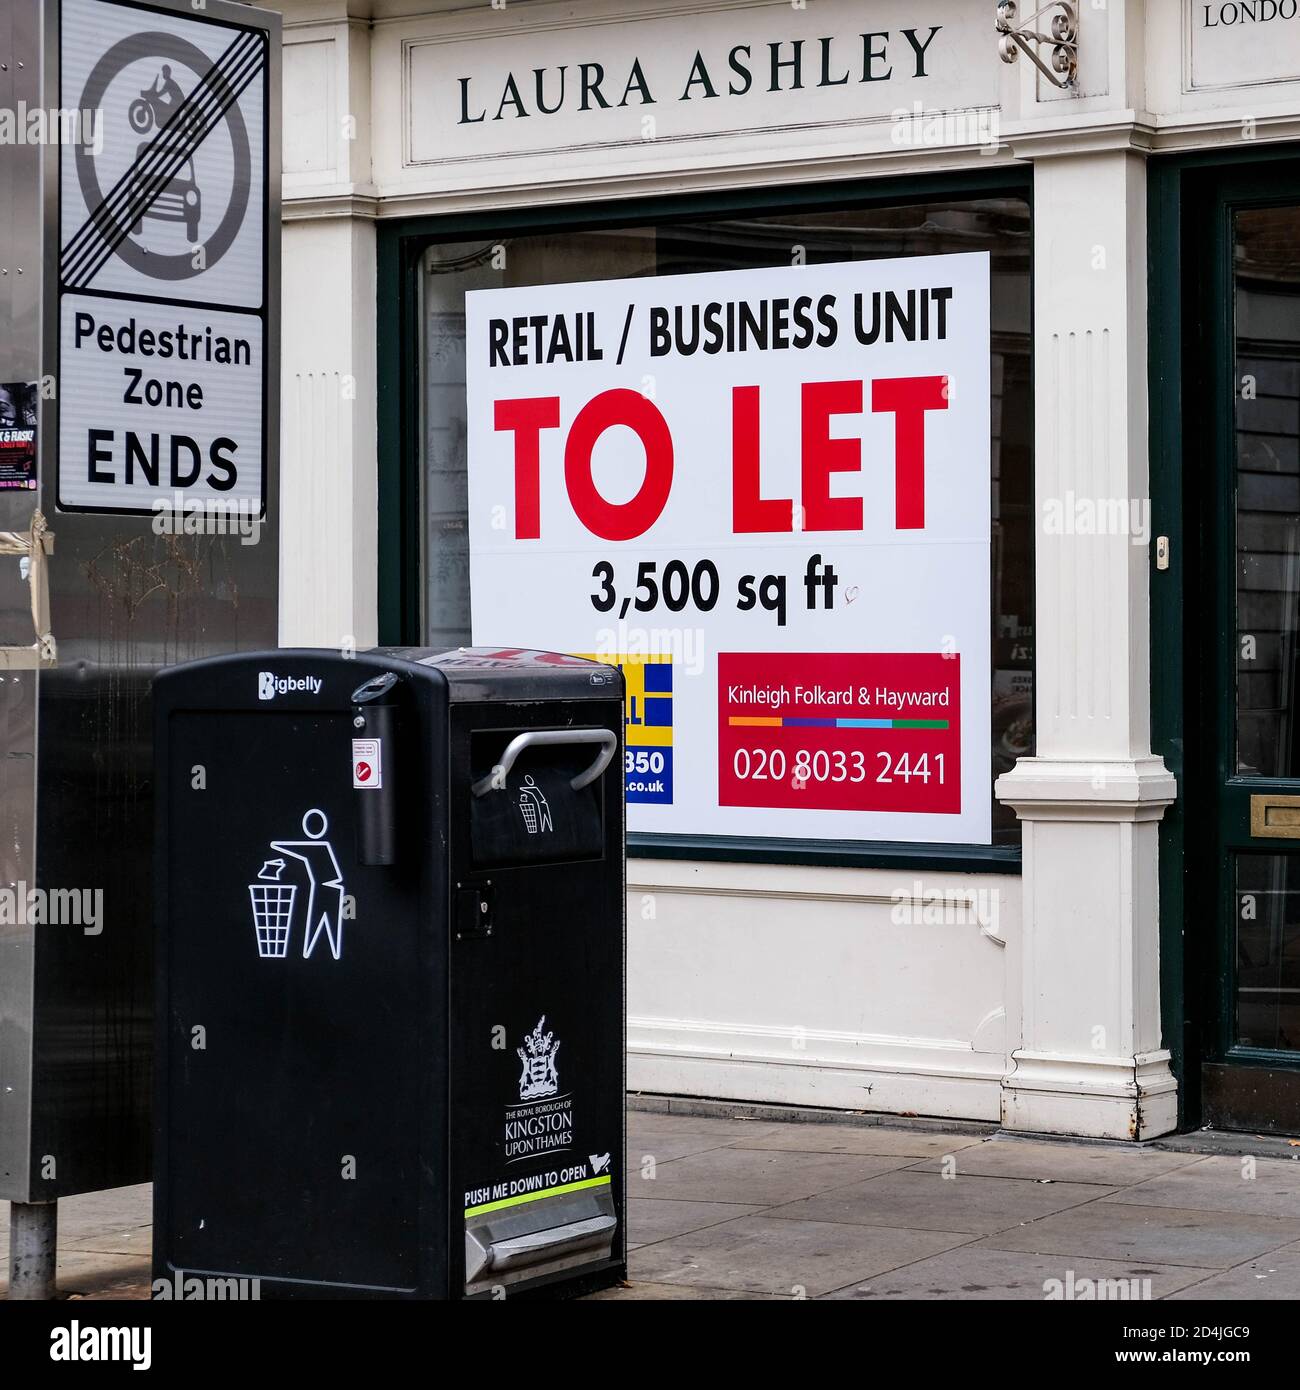 London UK October 09 2020, Laura Ashley High Street Home Interior Outlet Business Failure Due To COVID-19 PAndemic Stock Photo